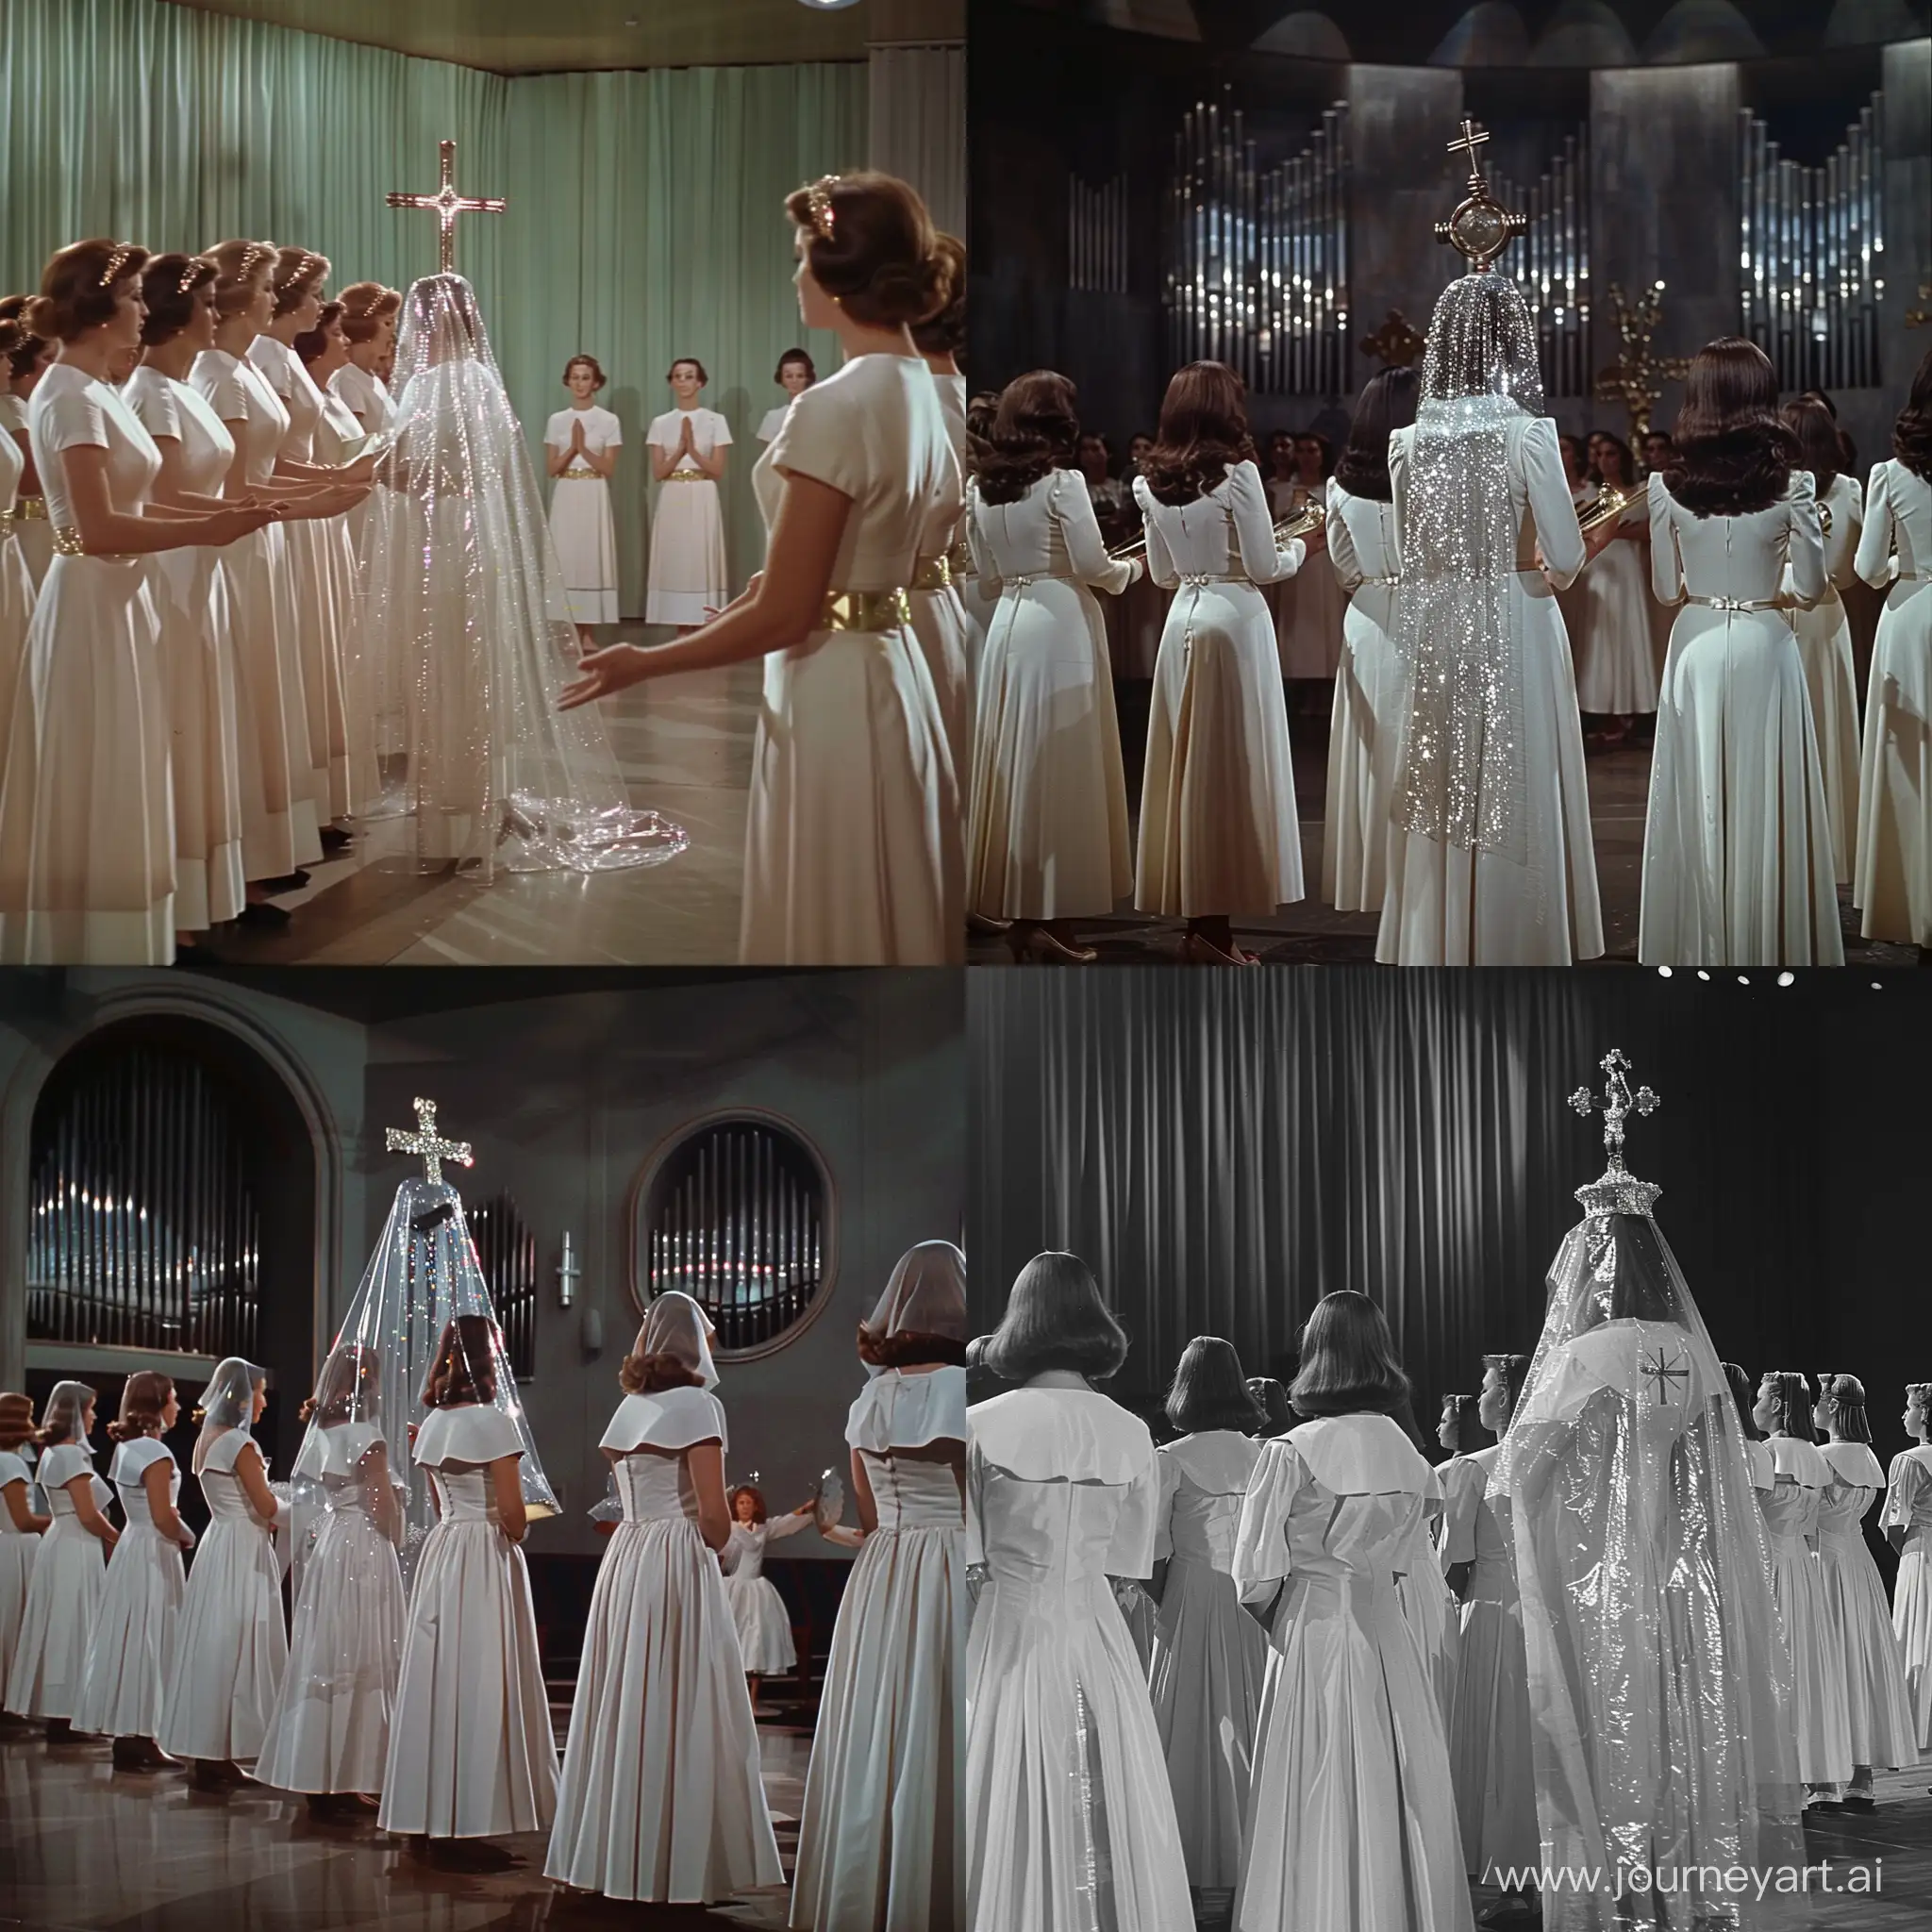 a church choir of women wearing long white dresses with a transparent robe with a shiny cross on top, screenshot from 1960s movies